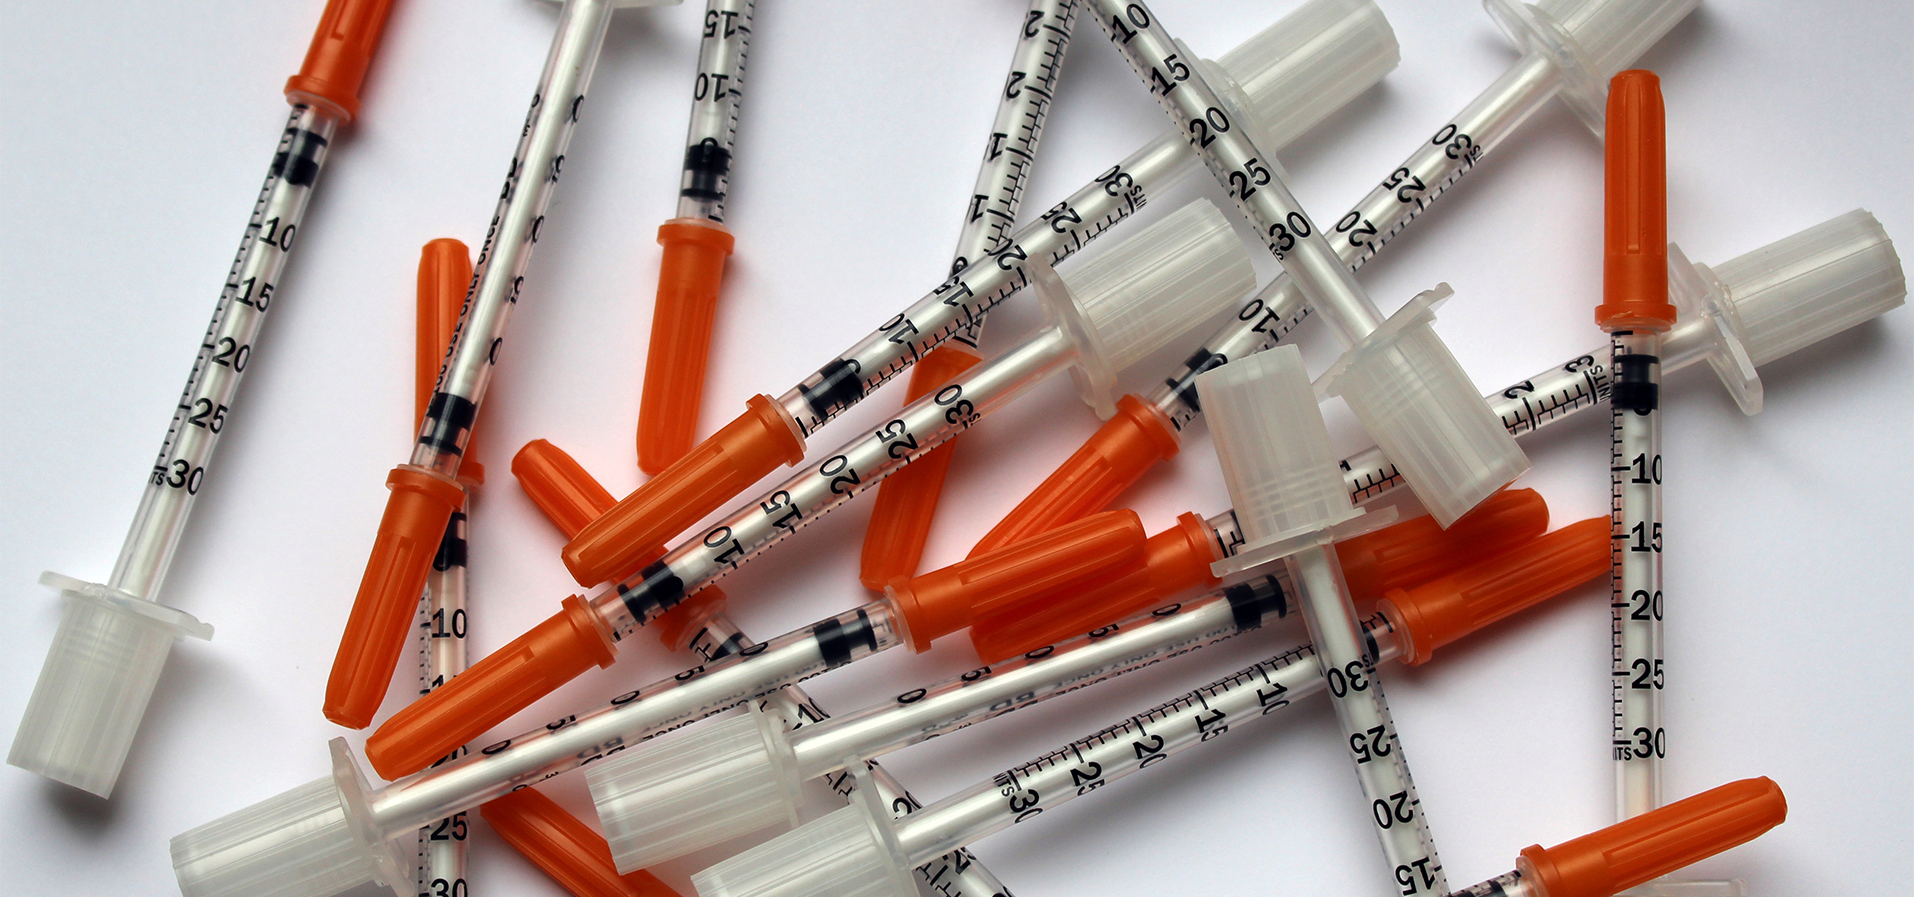 needles make people think about safe injection sites